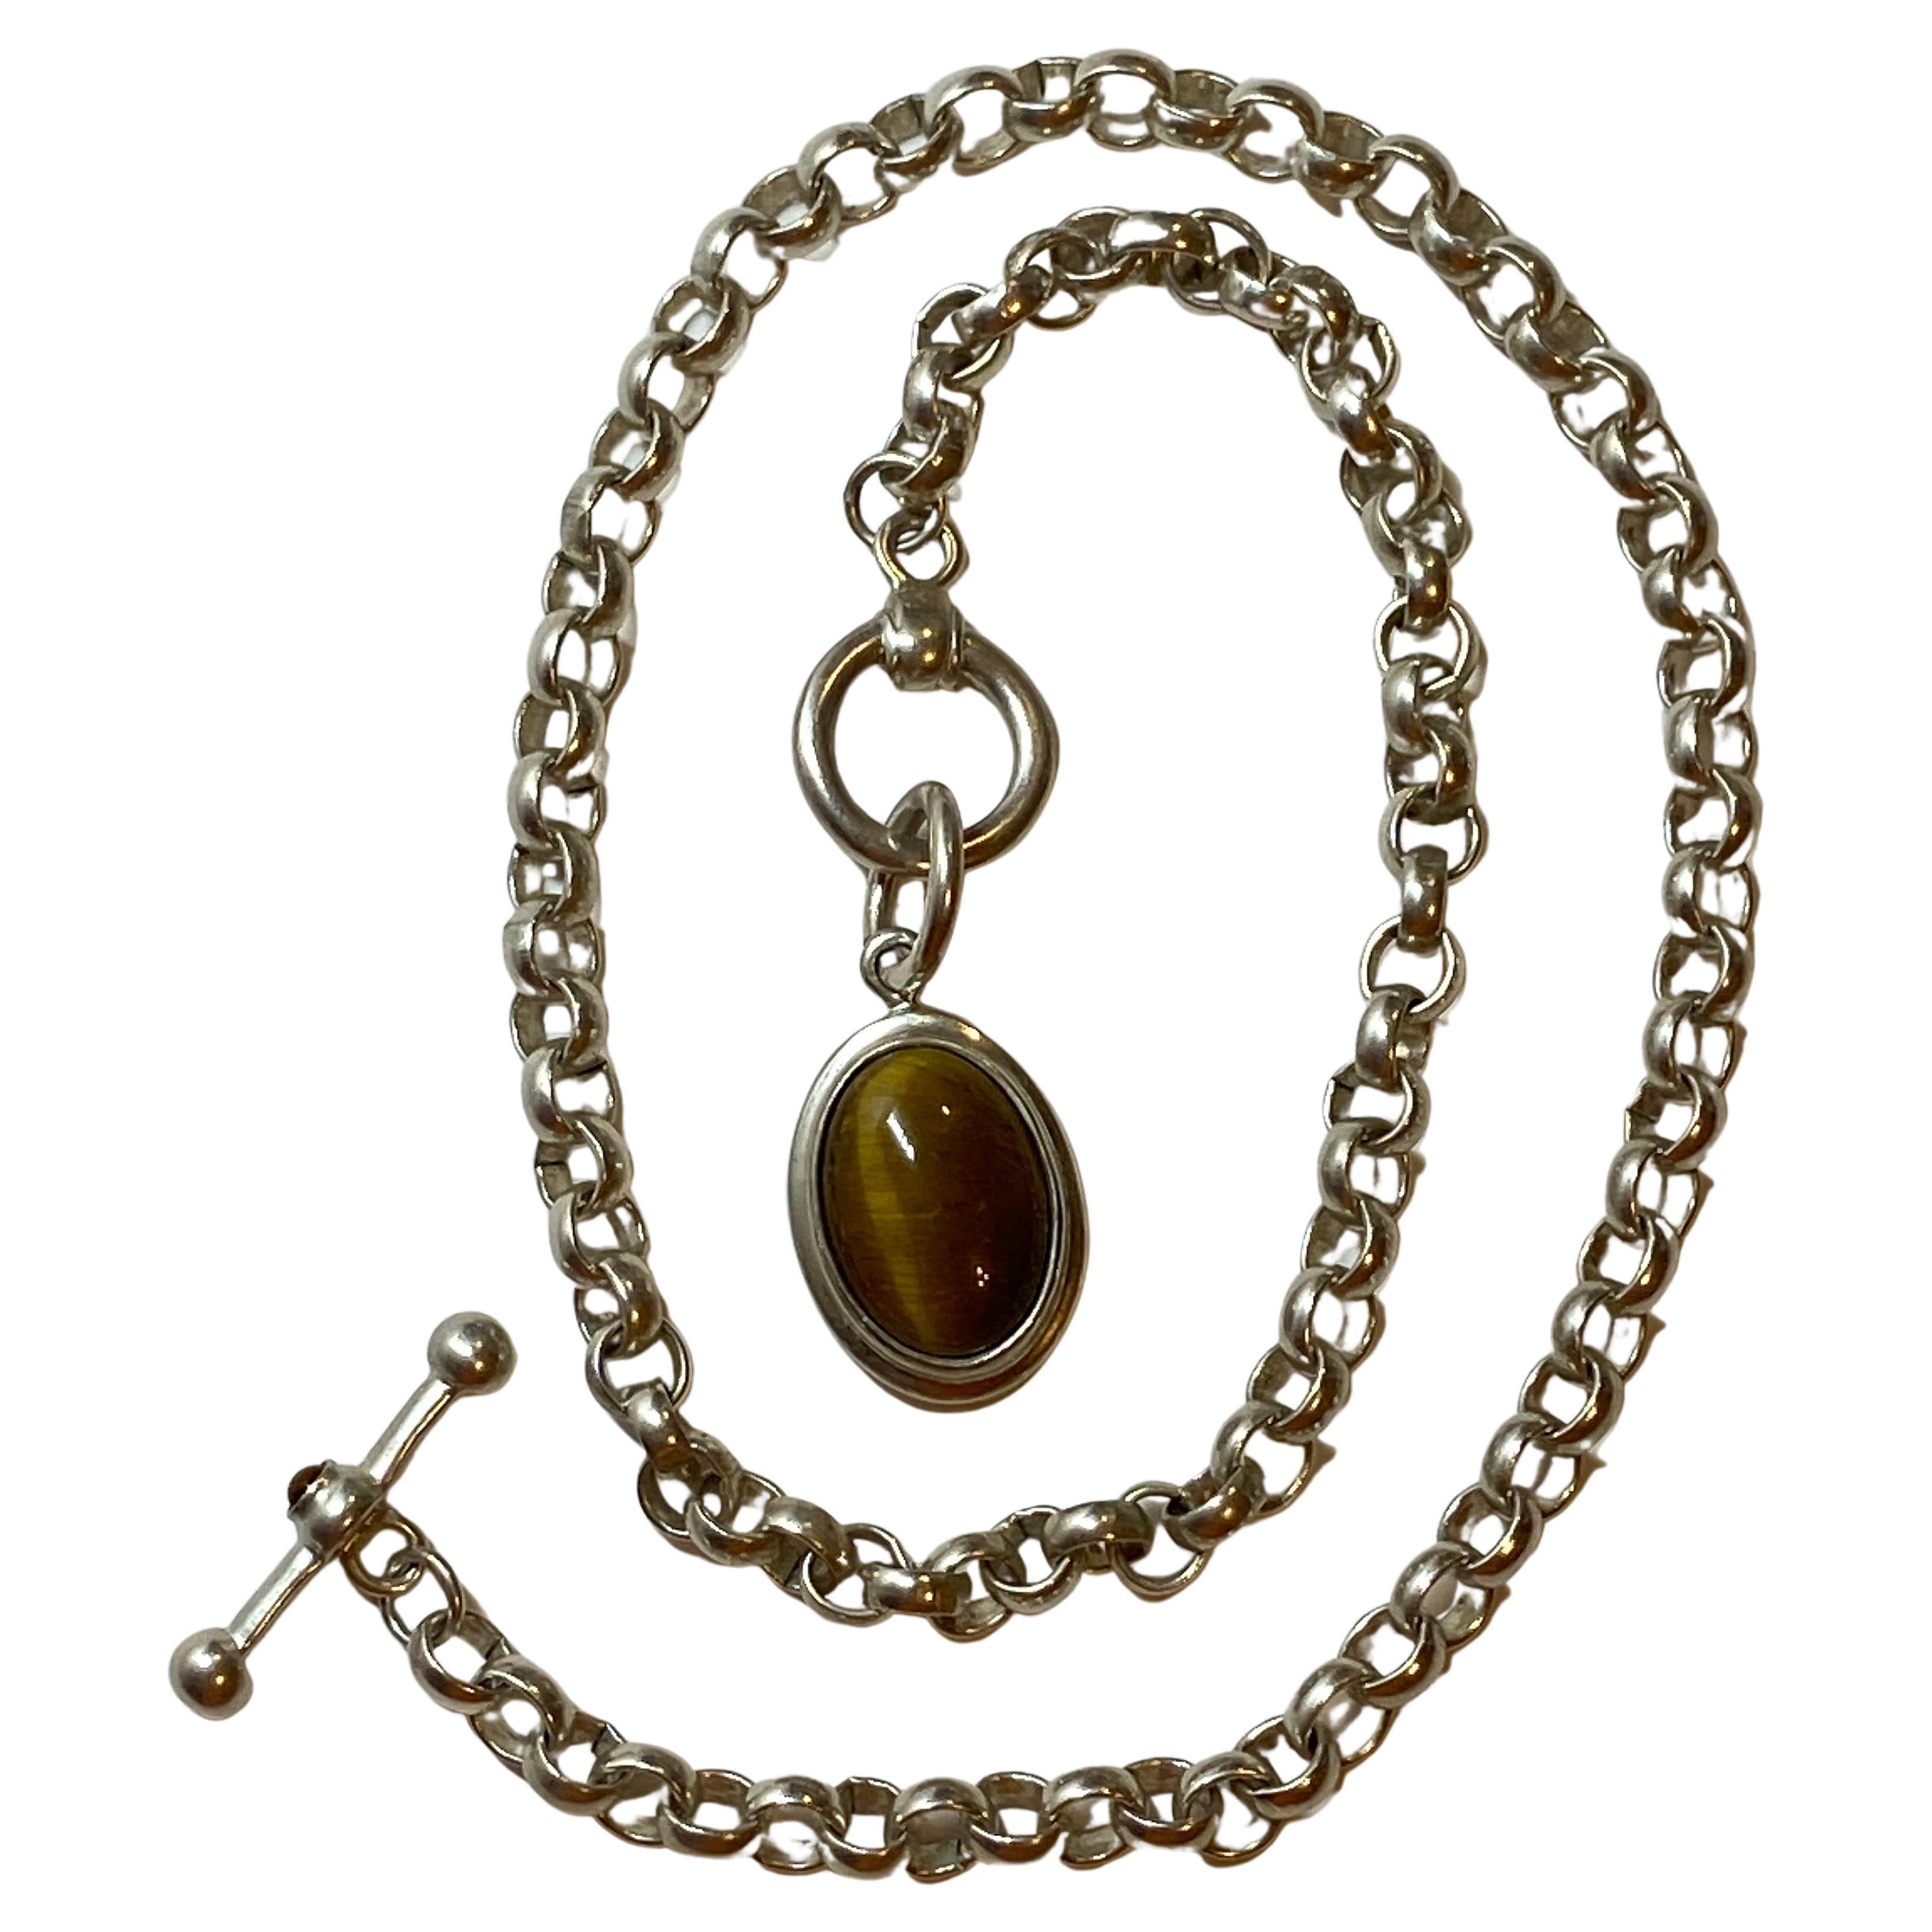 925 Thick Silver Italy-Style Chain Necklace Accented with "Tiger-Eye" Pendant